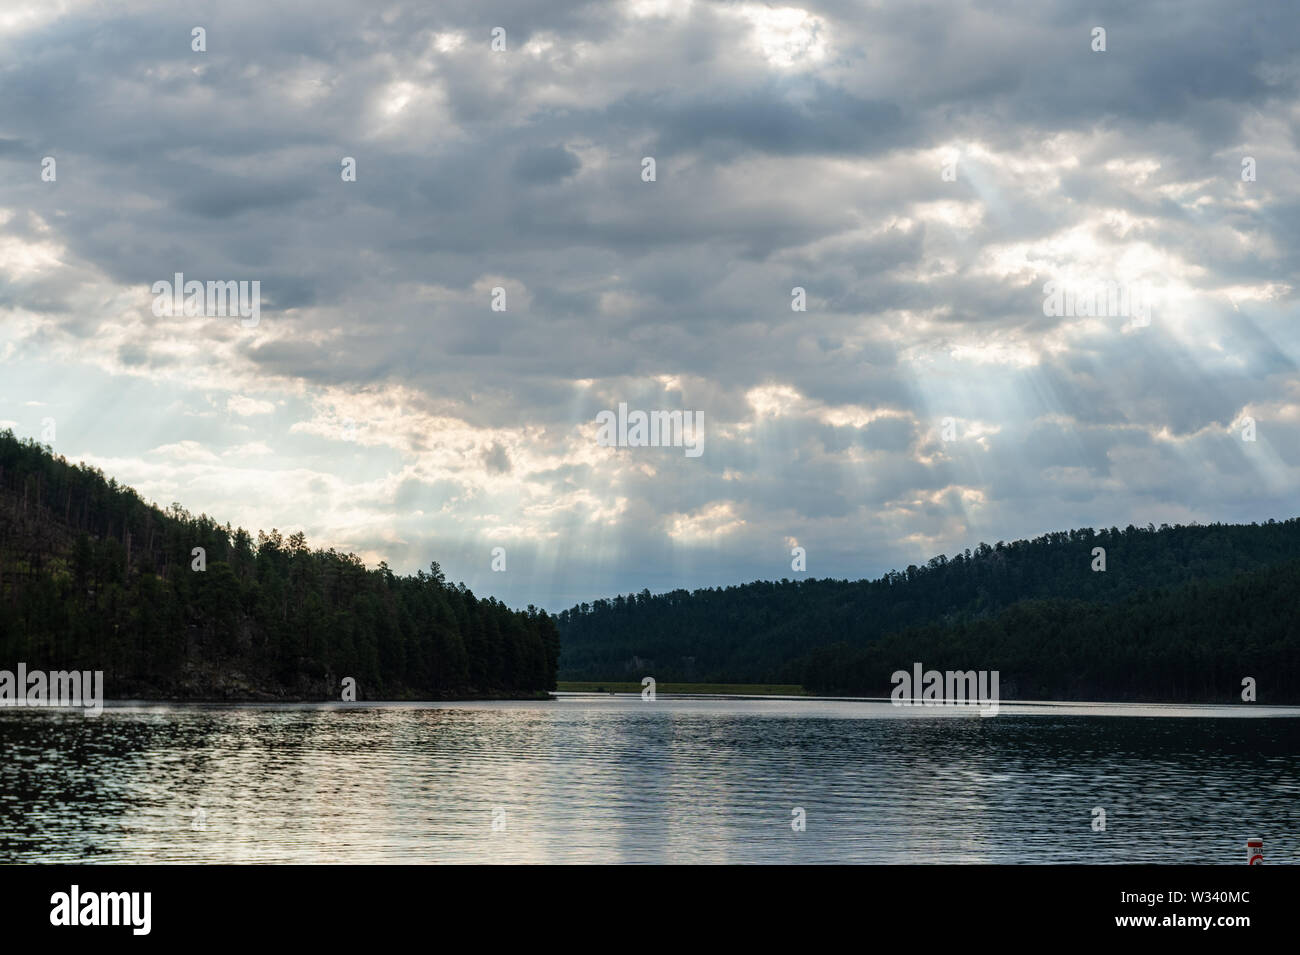 Sheridan Lake, in South Dakota's Black Hills, early in the Morning, after a thunder storm had passed over the area. Stock Photo